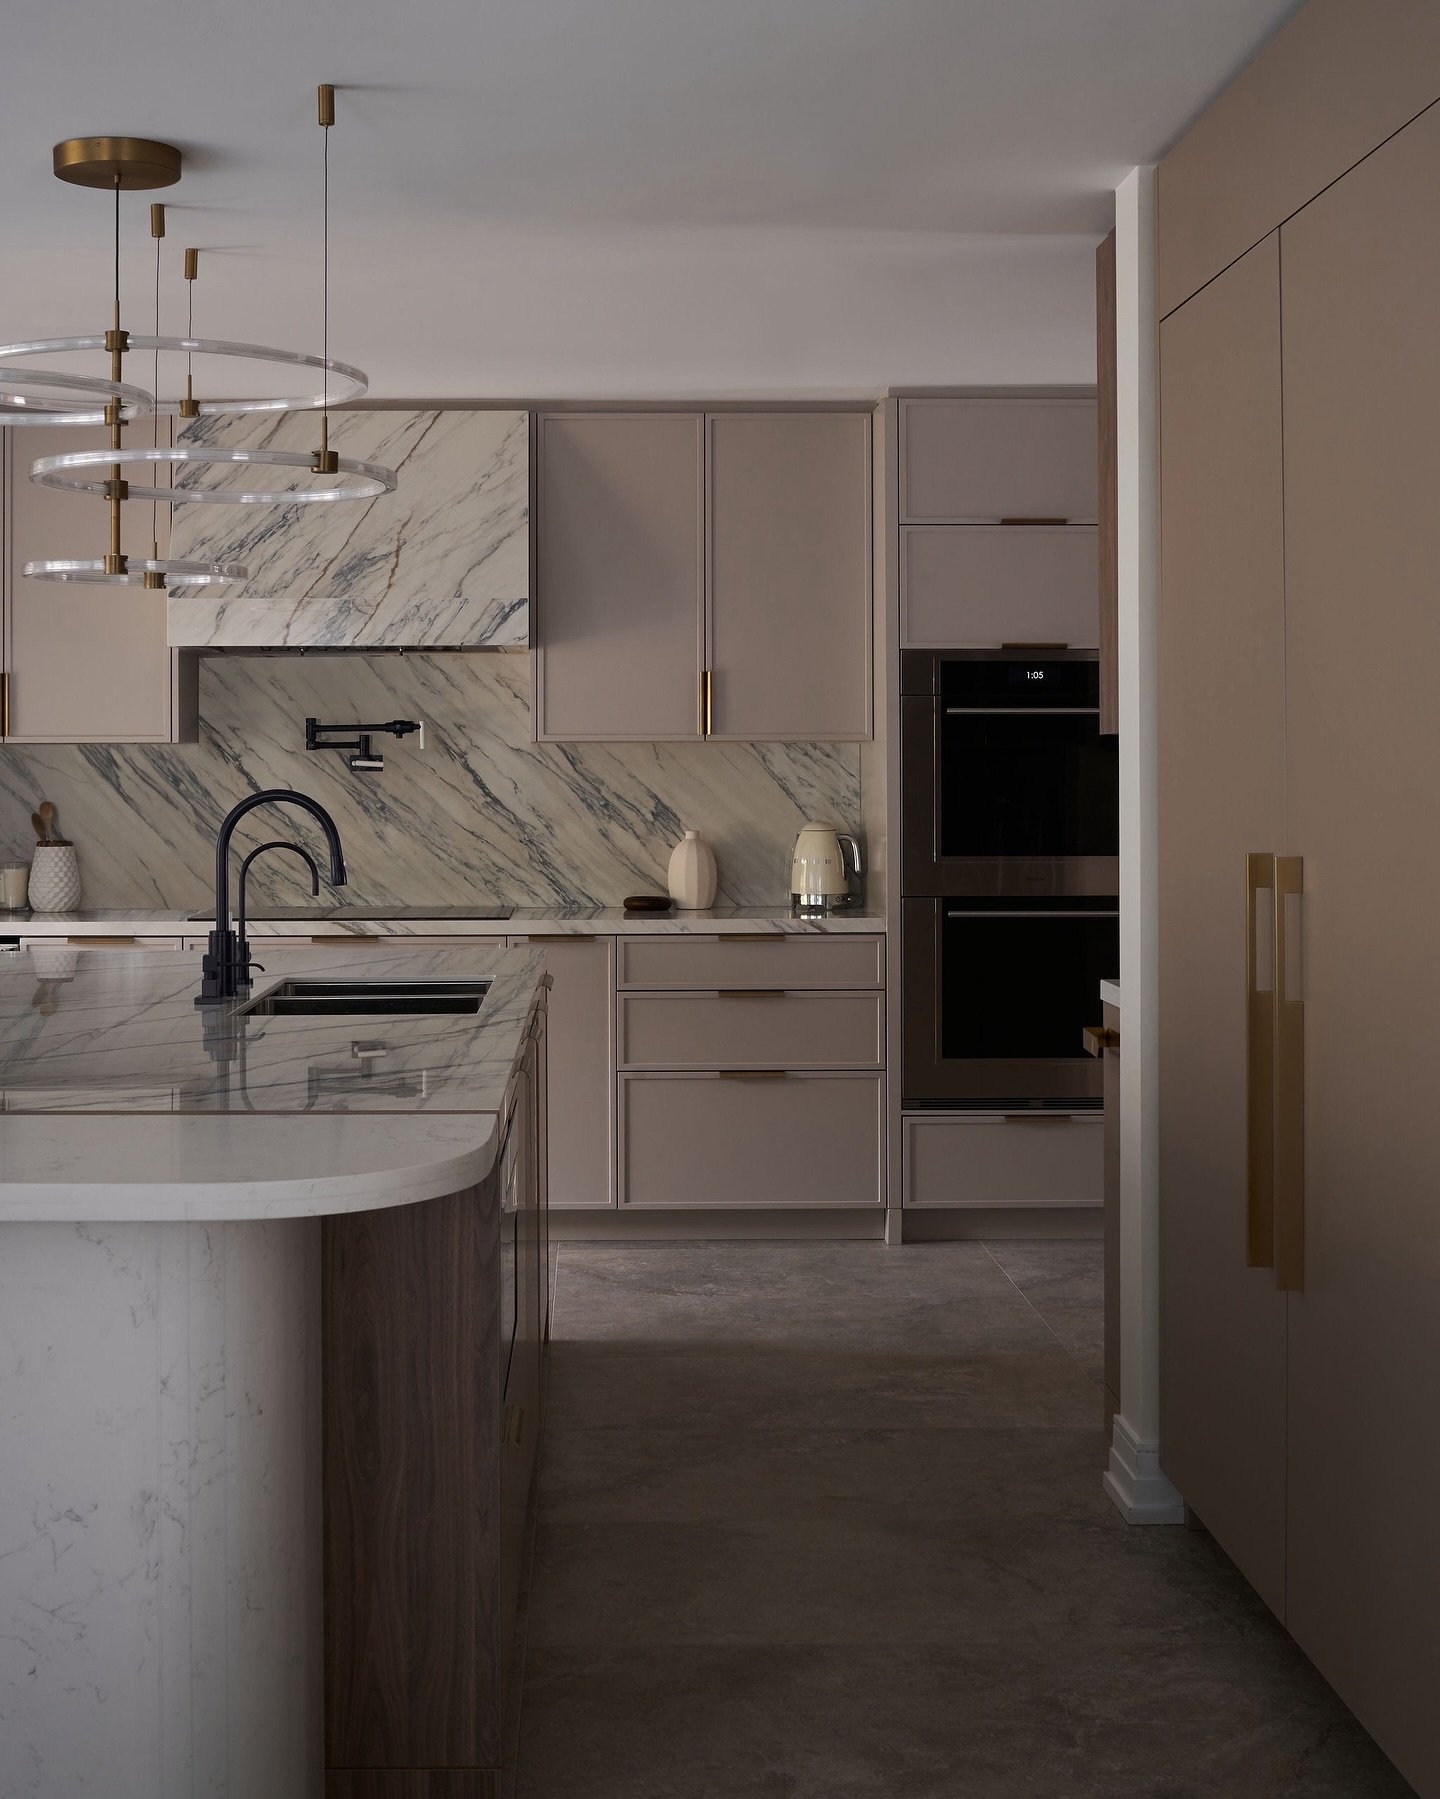 Embracing a warm, earthy color palette with hints of mauve and soft blues for this kitchen remodel 
.
Project #SPxSilverpineResidence
Photo @shotbyjuleslee